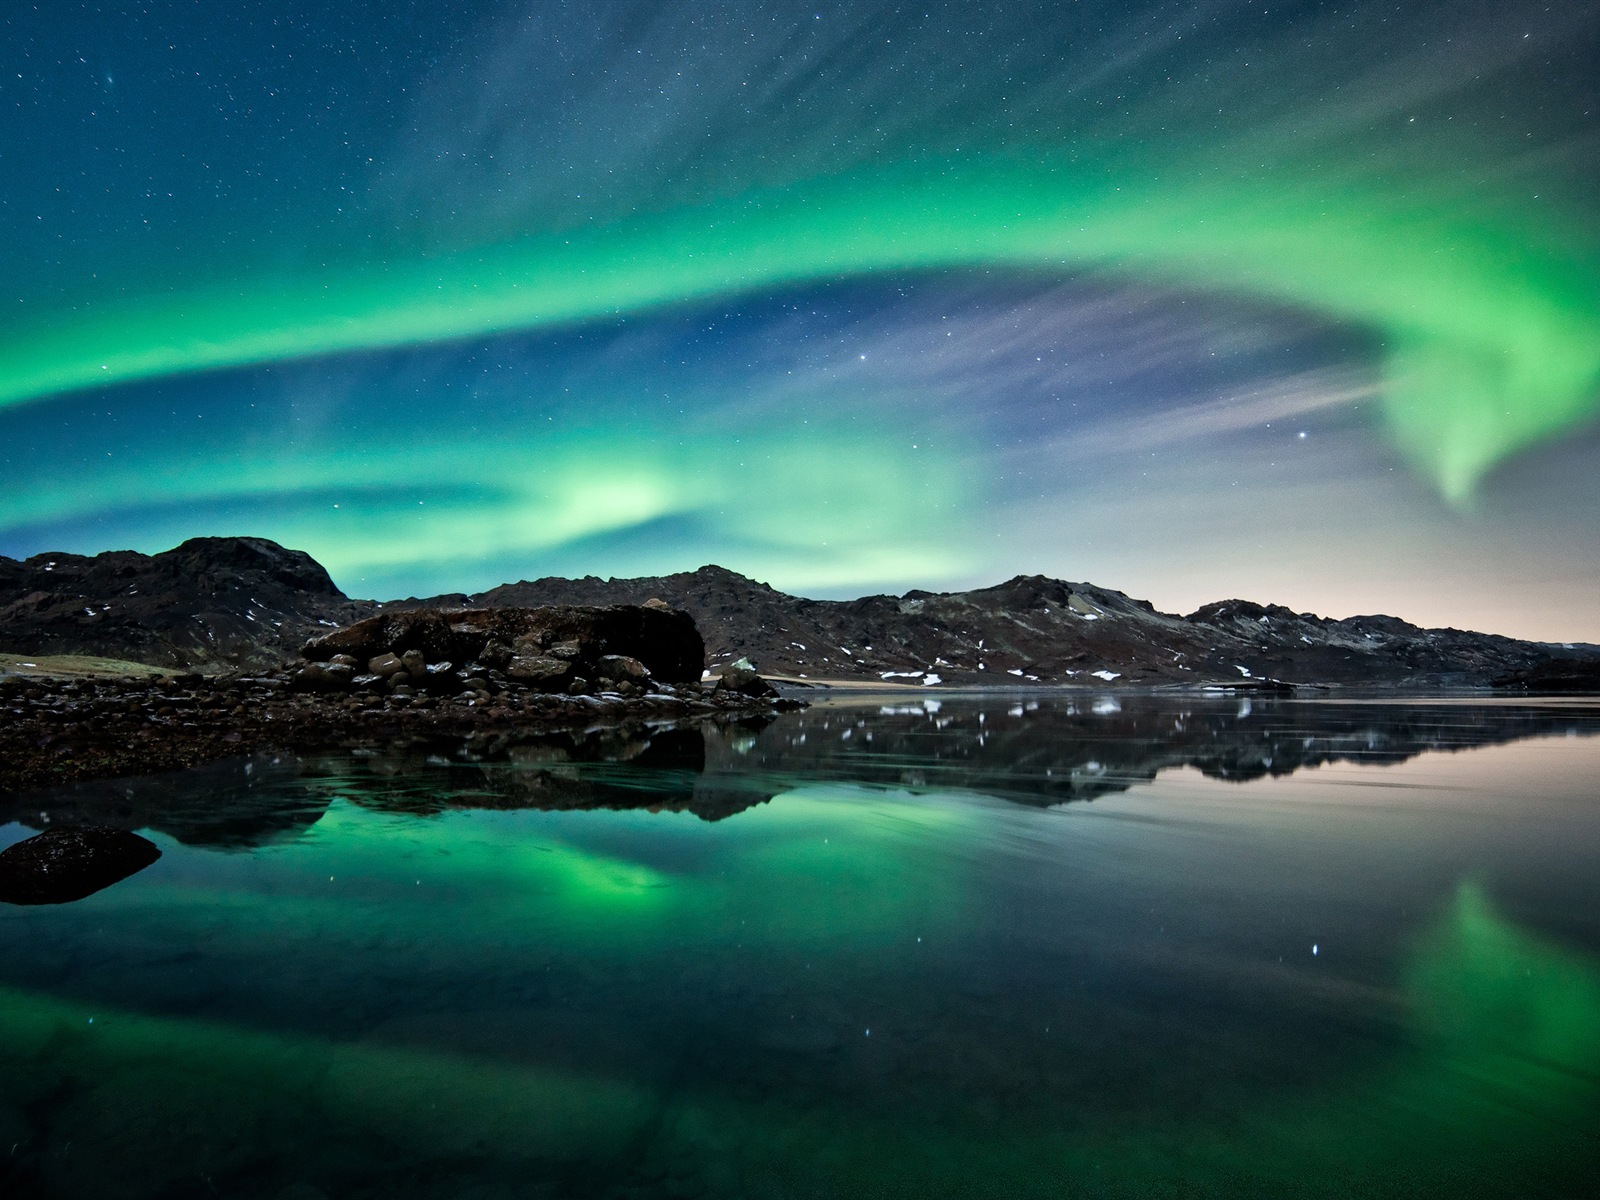 Natural wonders of the Northern Lights HD Wallpaper (1) #1 - 1600x1200